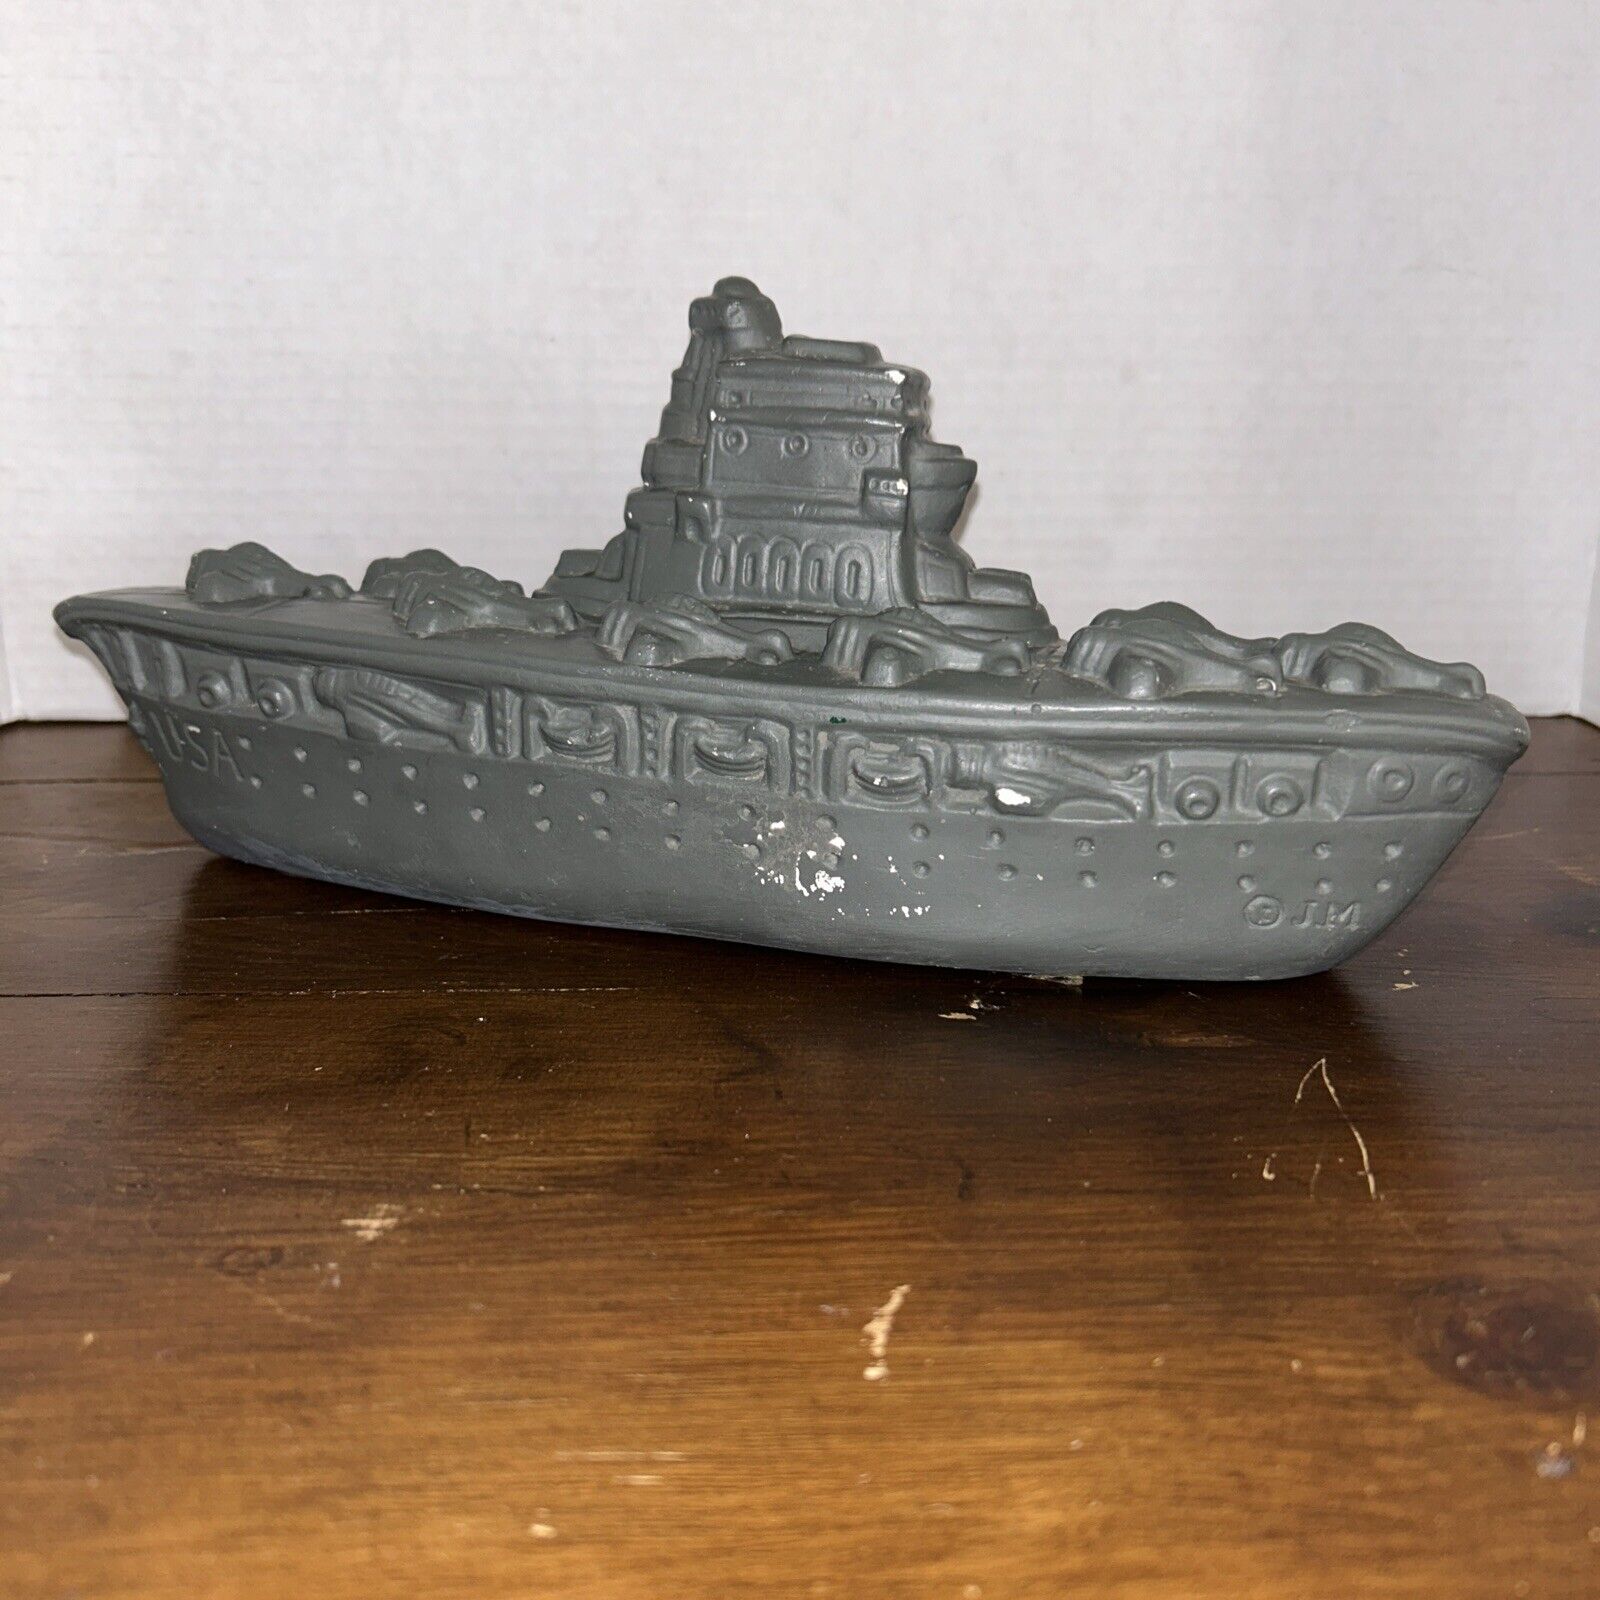 Old, hard to find, ceramic “Destroyer Bank” made by the Novelty Manufacturing Co